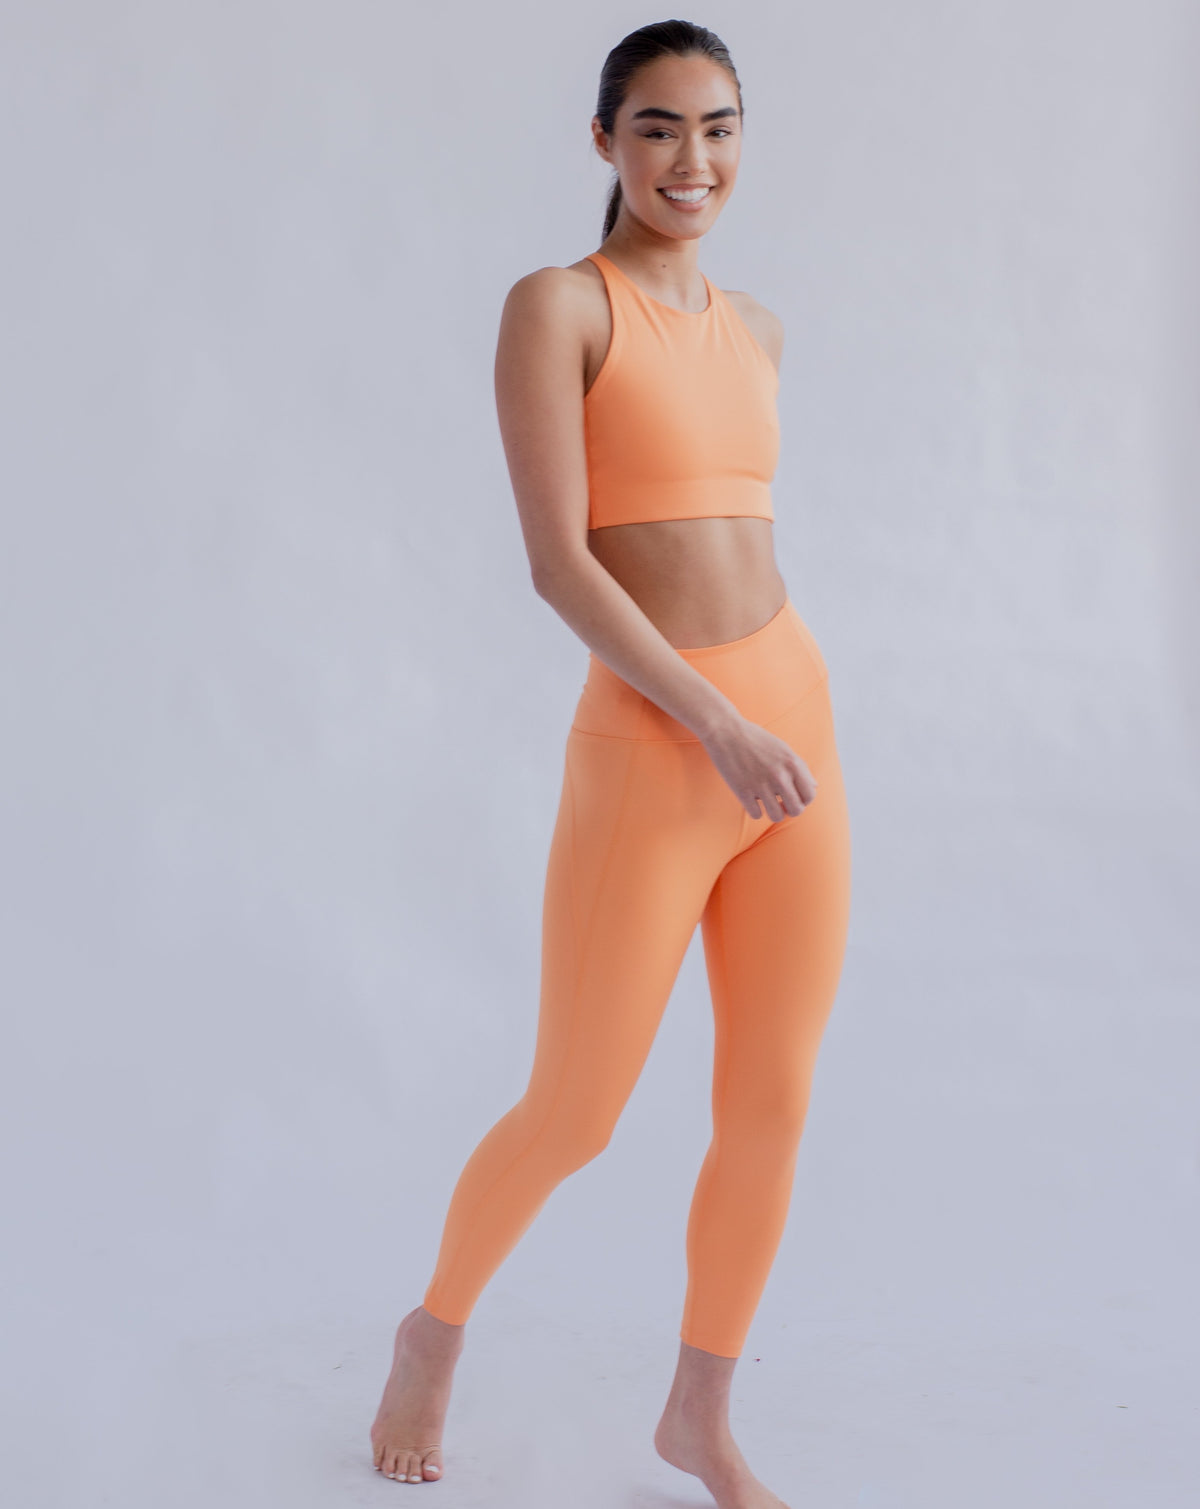 Girlfriend Collective High Rise Compression Leggings